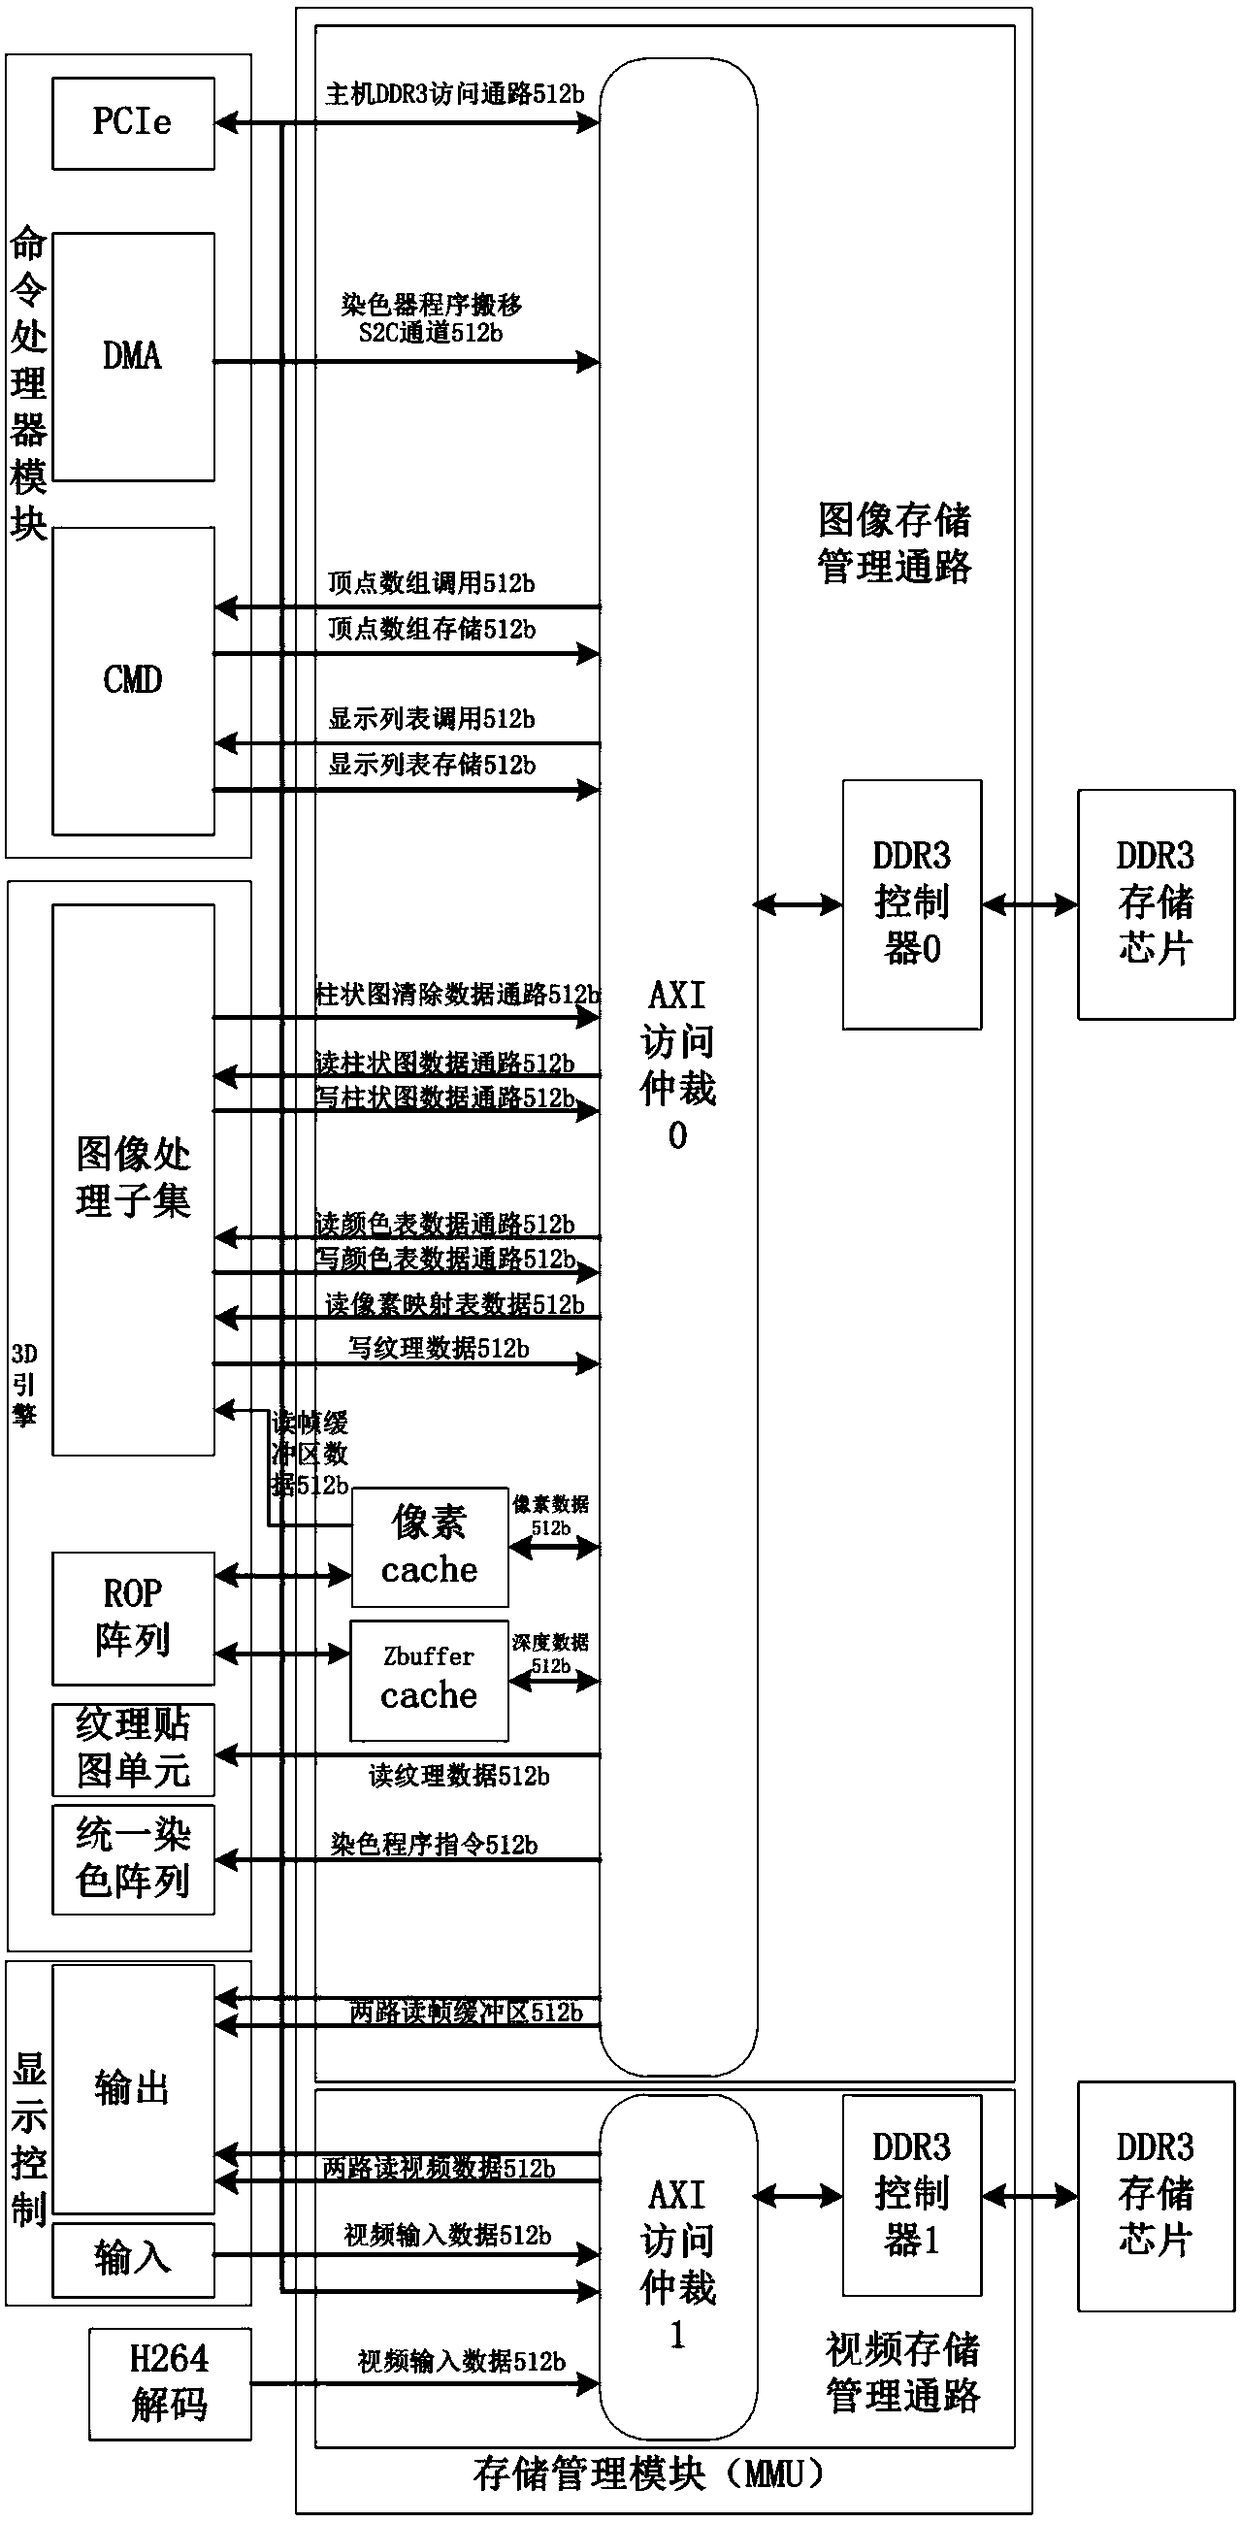 A GPU 3D Engine On-Chip Storage Hierarchy for Unified Dyeing Architecture